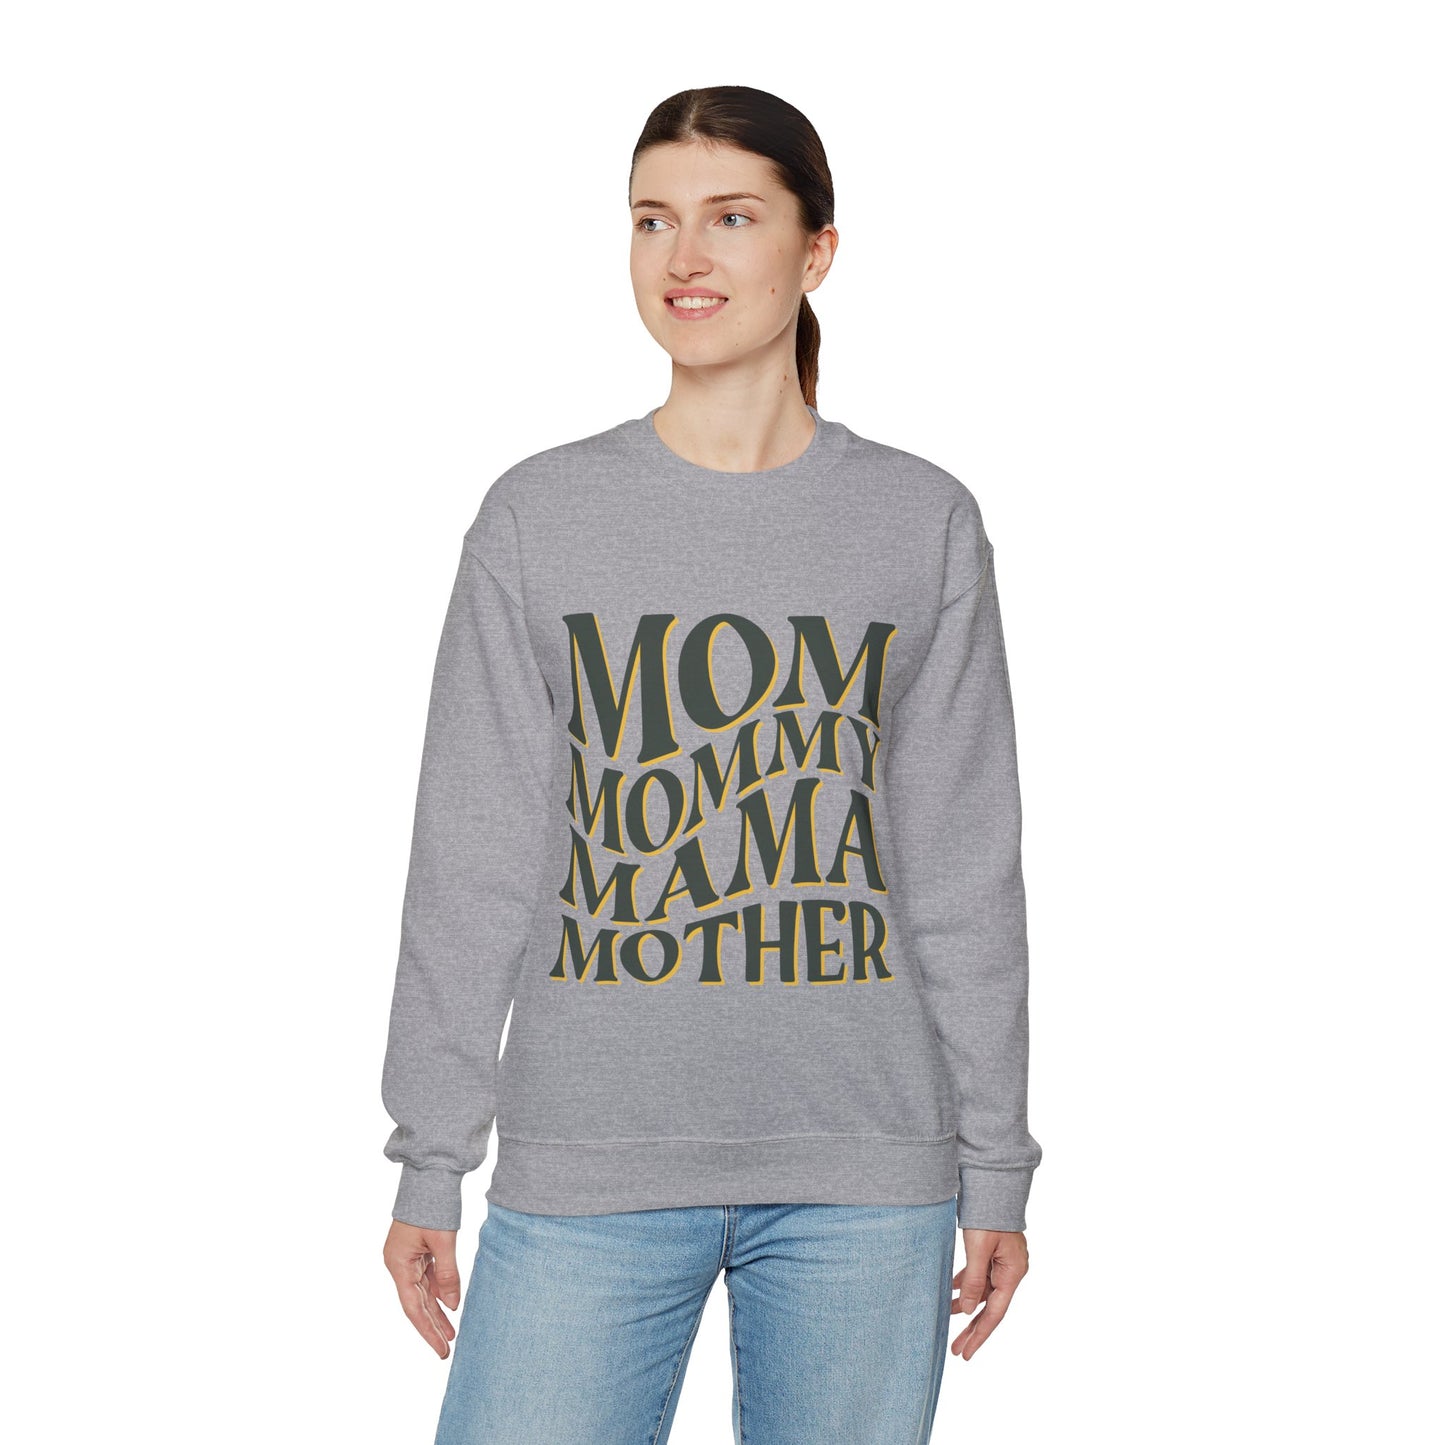 Personalized premium sweatshirt for mom, comfort and style, mother's day, gifts for mom's day, custom mama, mommy